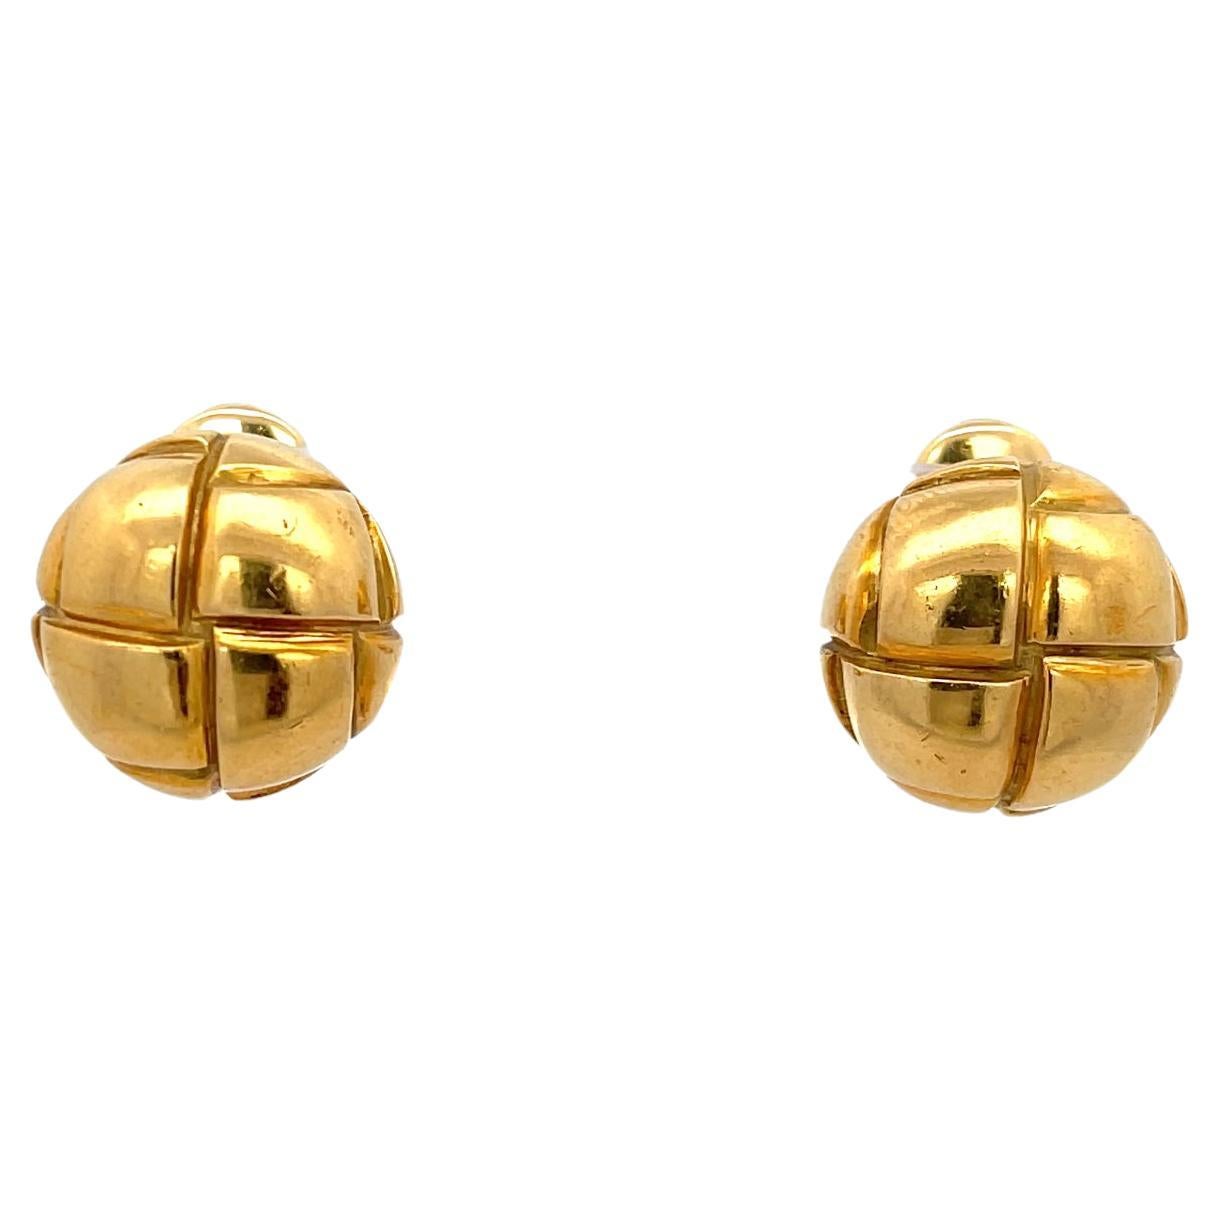 Andrew Clunn Small Knot Earrings 18K Yellow Gold